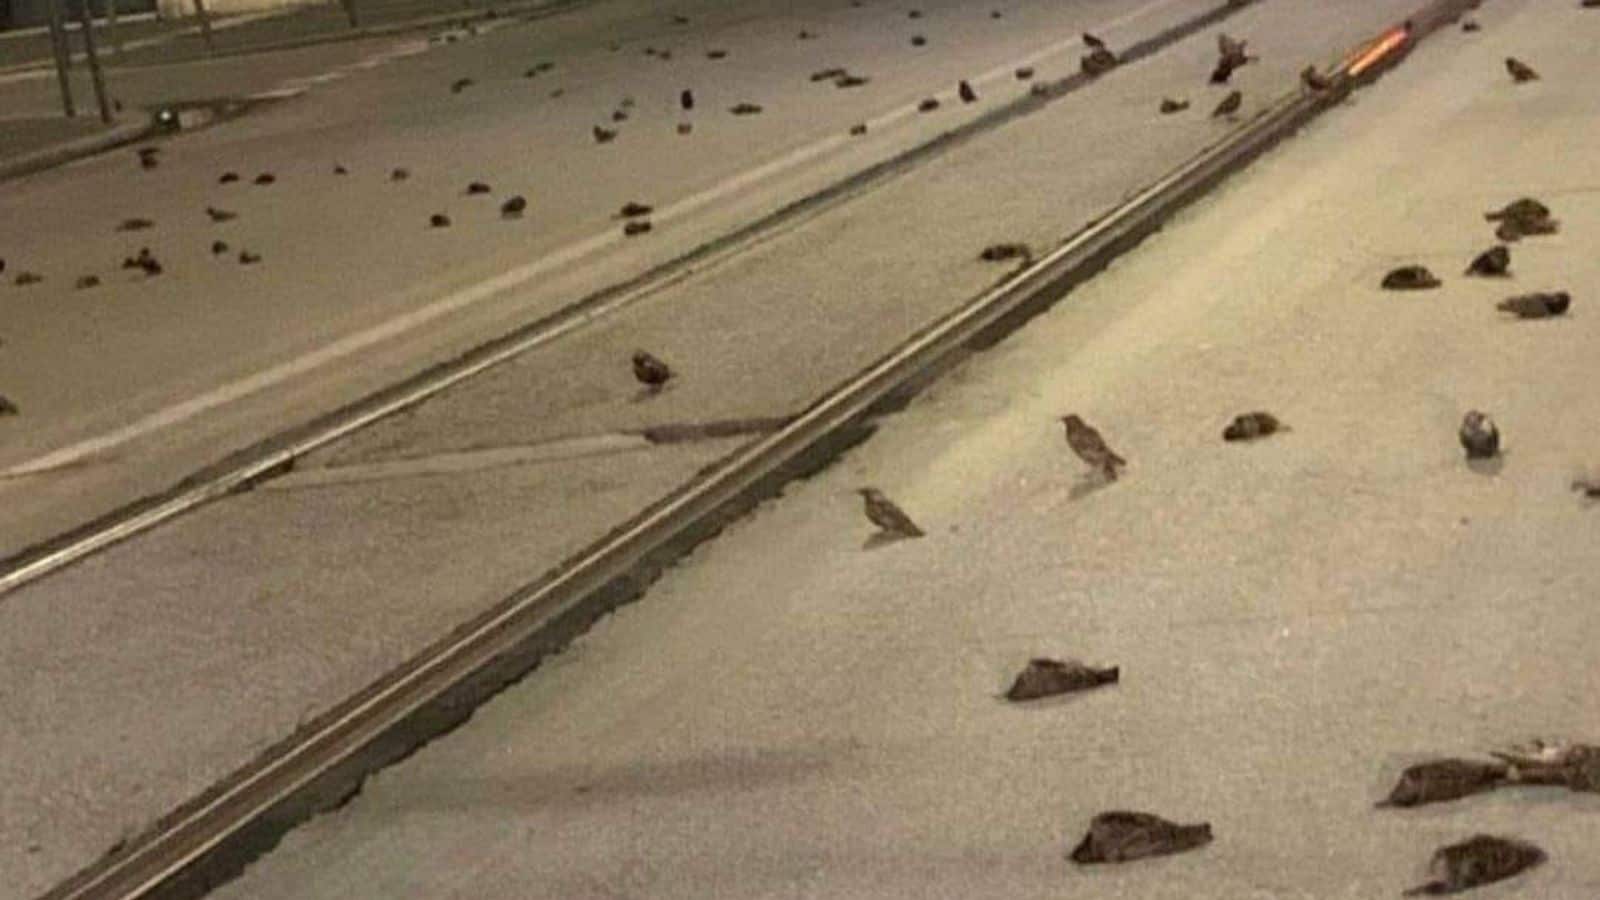 Hundreds of birds found dead in the middle of the road after New Year's eve party